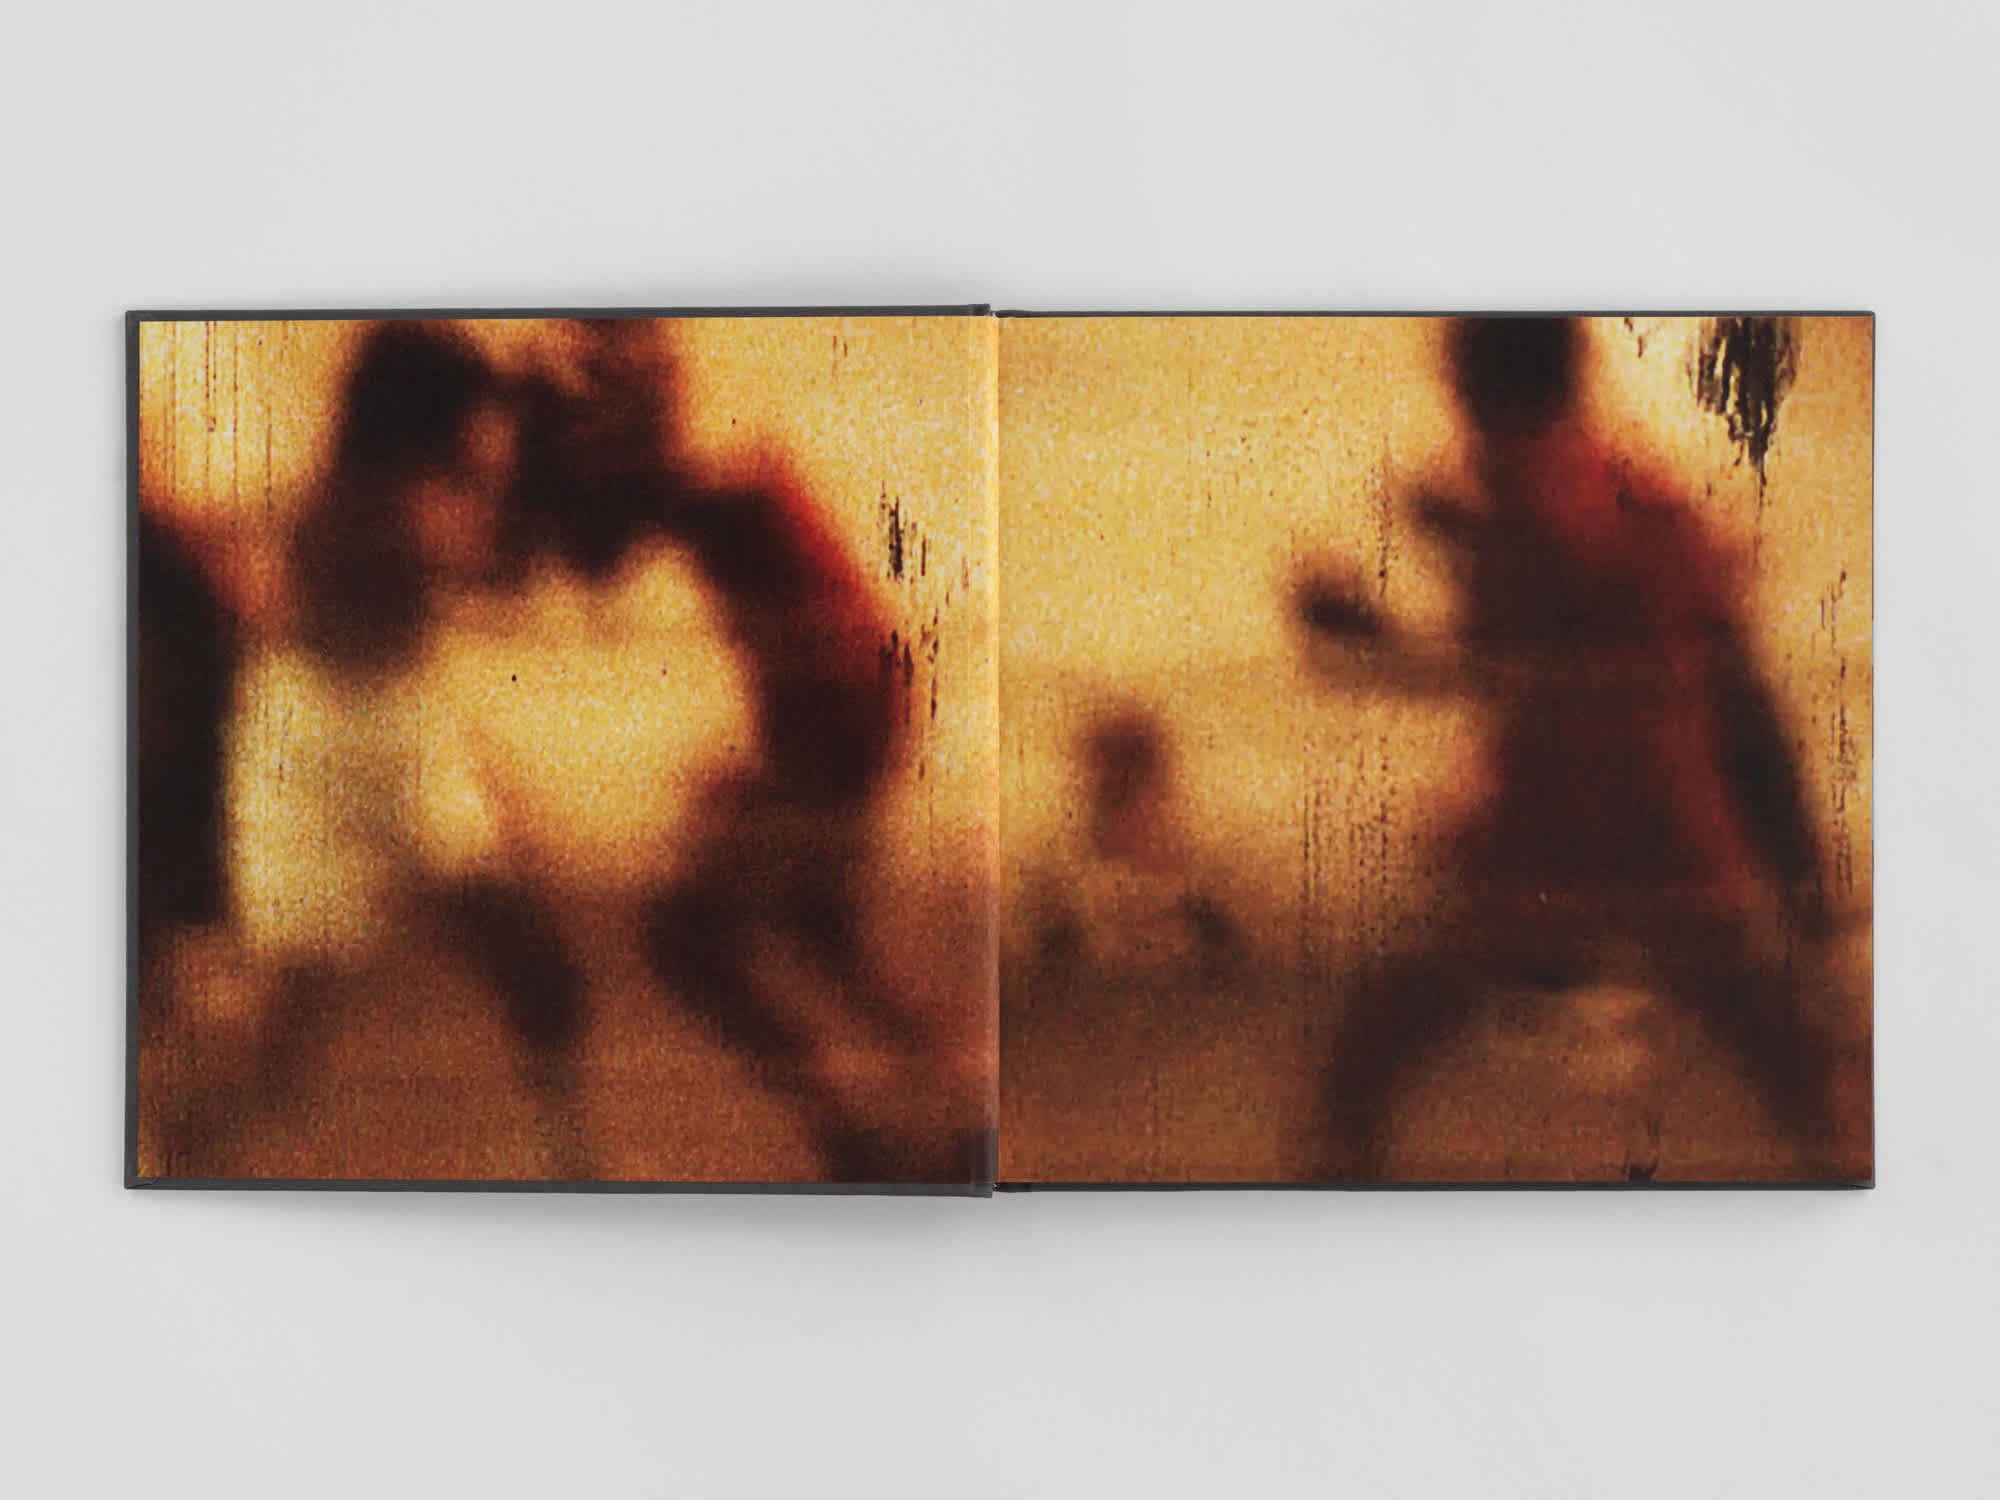 Open book with blurry, full-bleed centerfold image of bodies in motion.